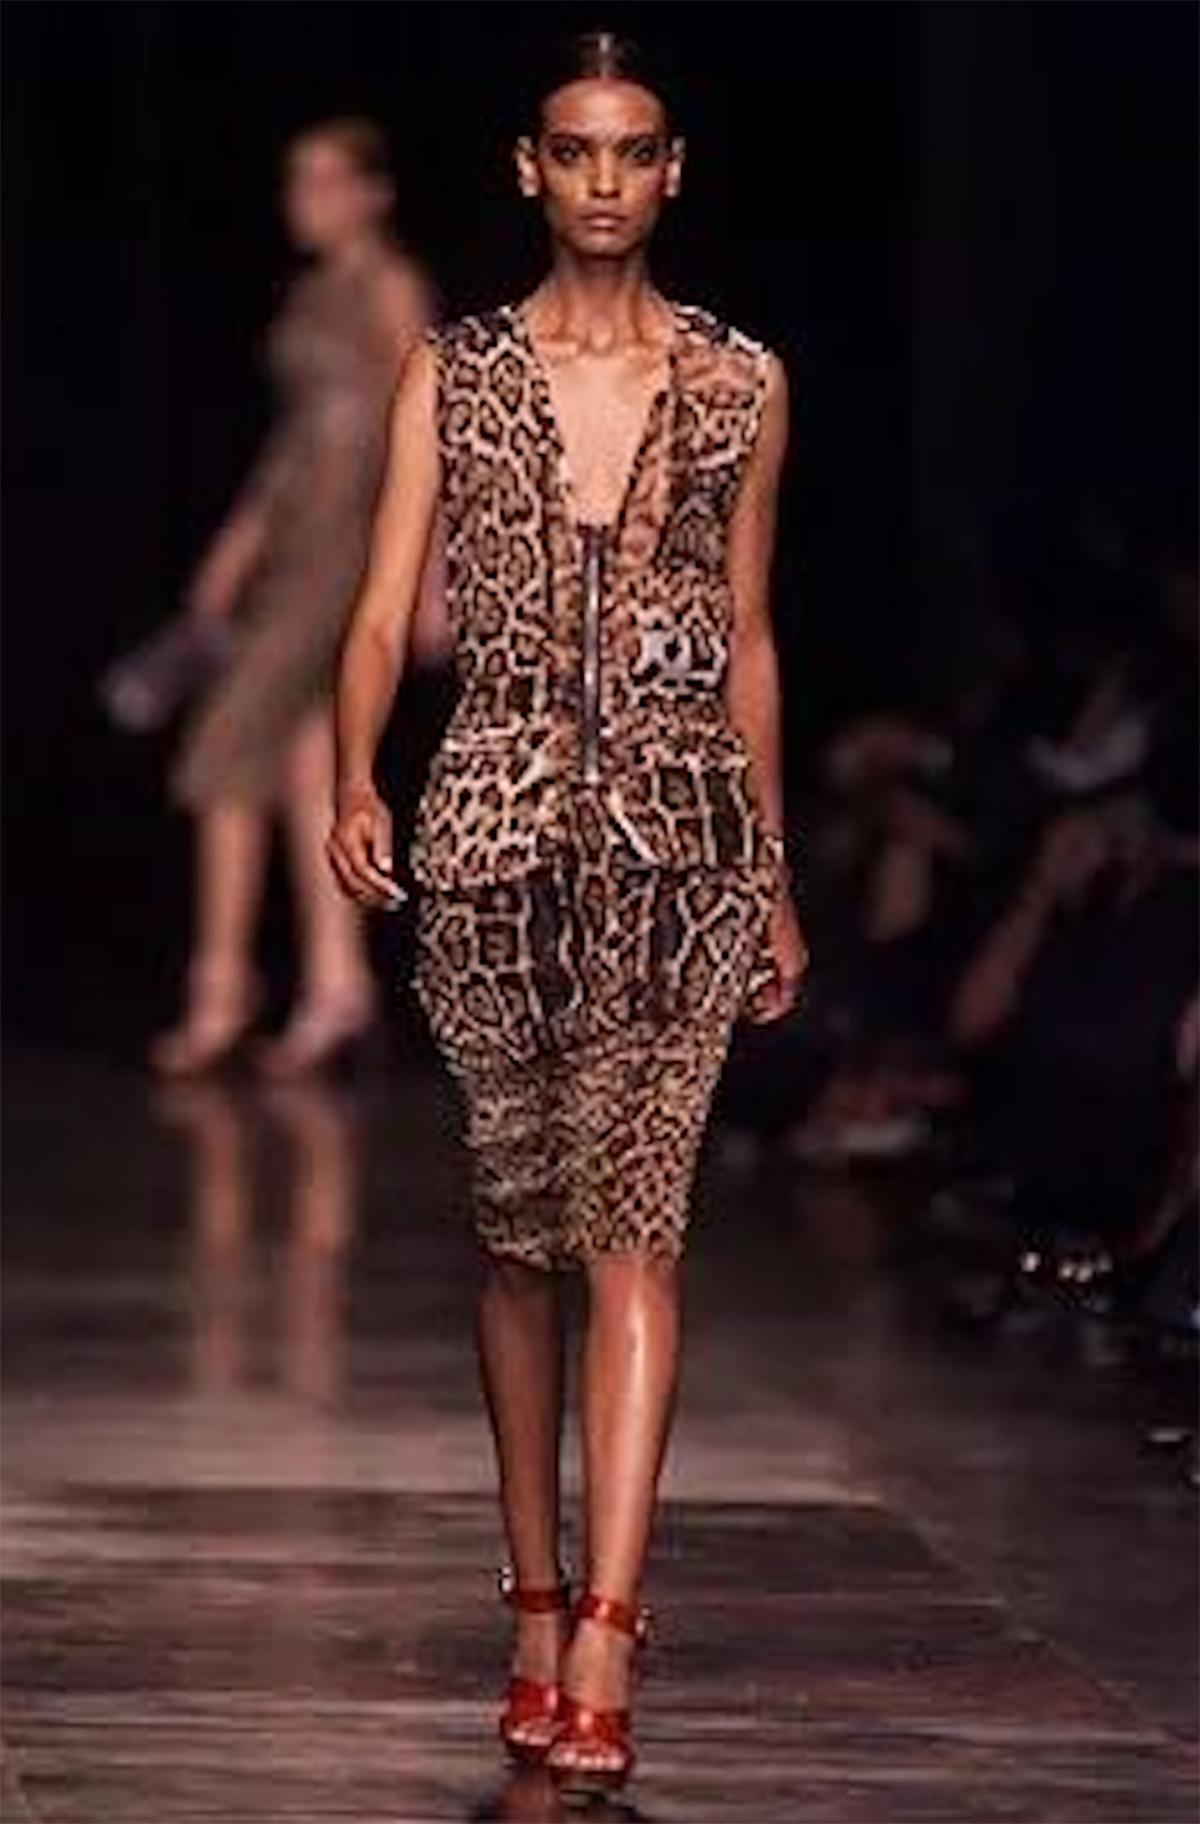 This leopard print two piece was the opening look for Yves Saint Laurent’s Spring Summer 2002 Rive Gauche collection by Tom Ford.

This elegant two-piece consists of a high waisted silk pencil skirt and a zip up sleeveless silk top in a classic